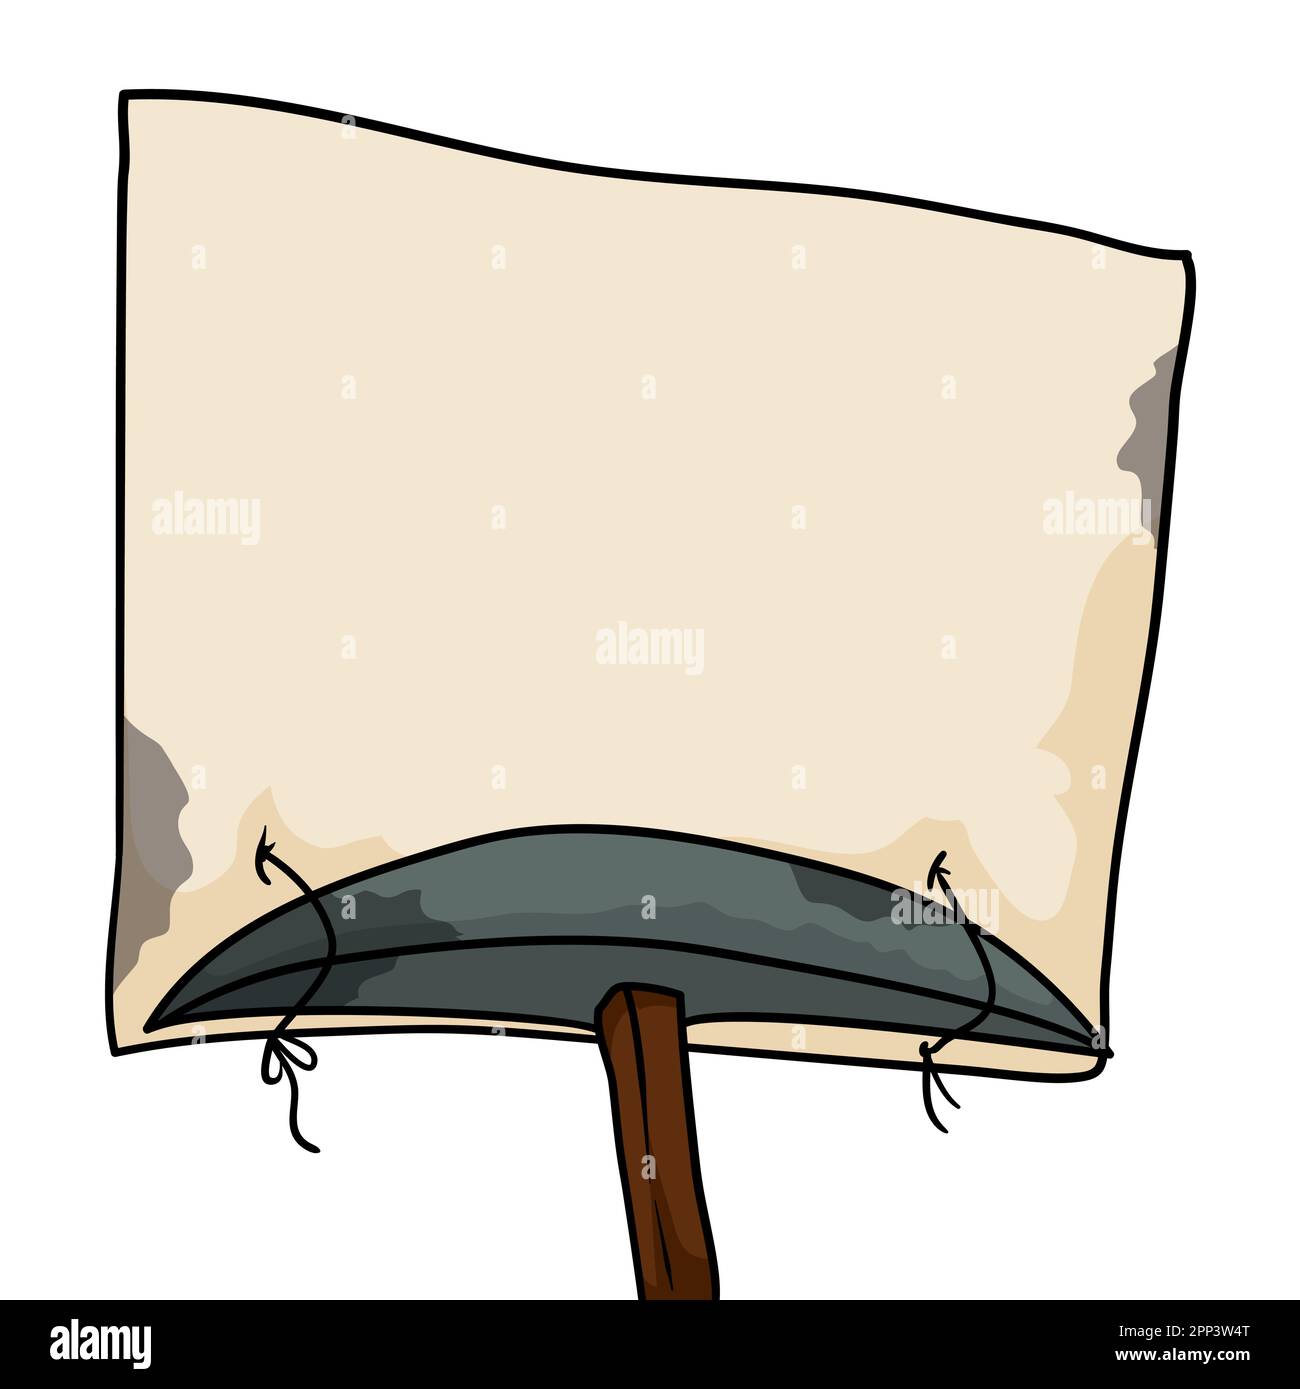 Banner template made with a blank paper attached to a pick axe. Cartoon style design on white background. Stock Vector